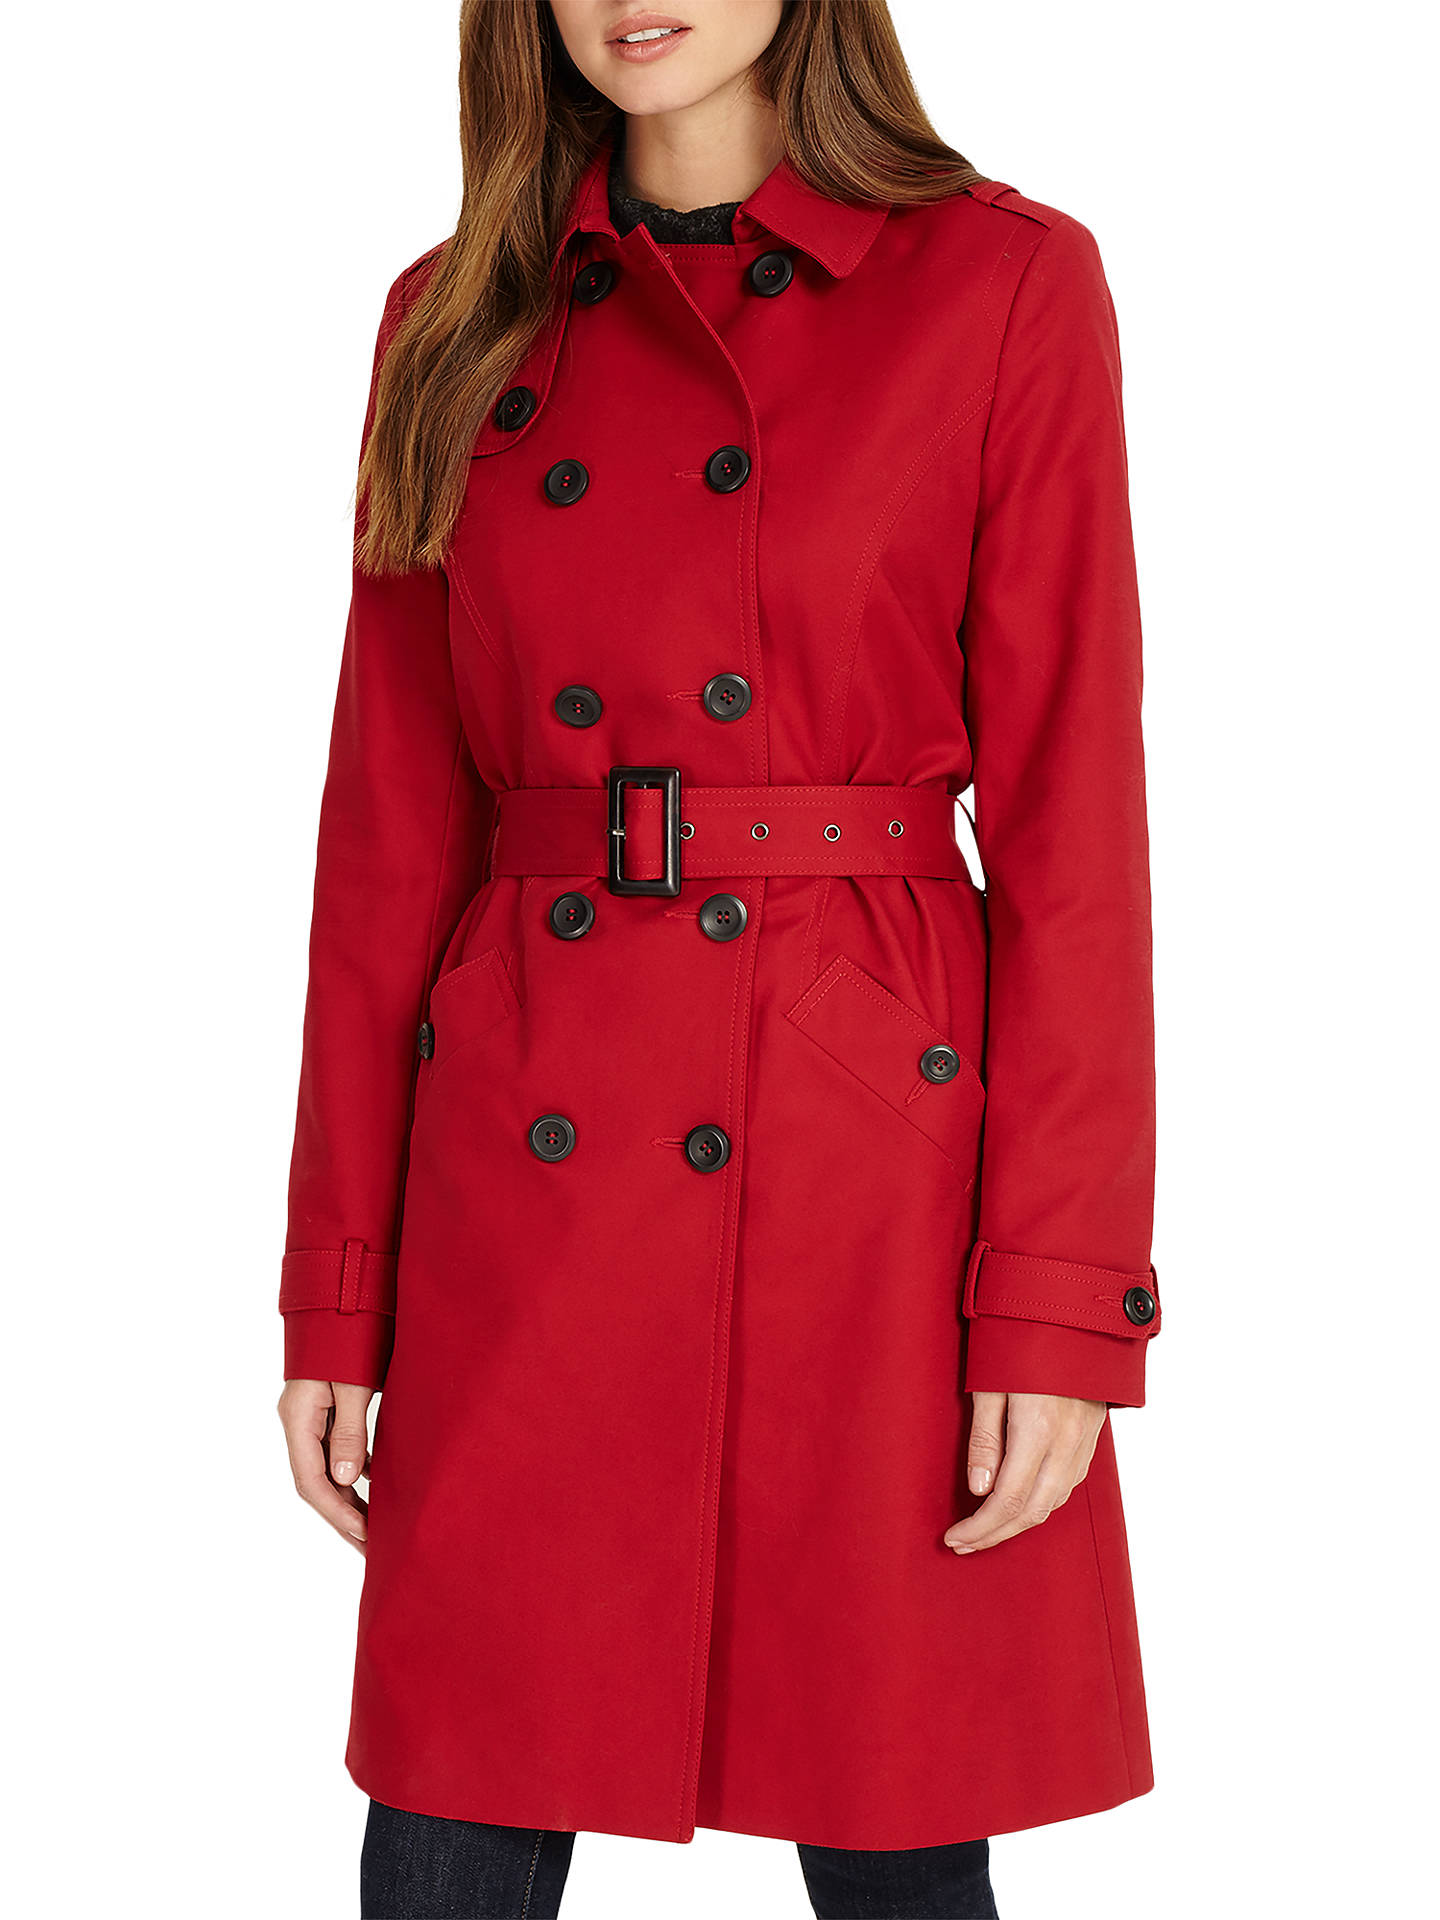 Phase Eight Tabatha Trench Coat at John Lewis & Partners